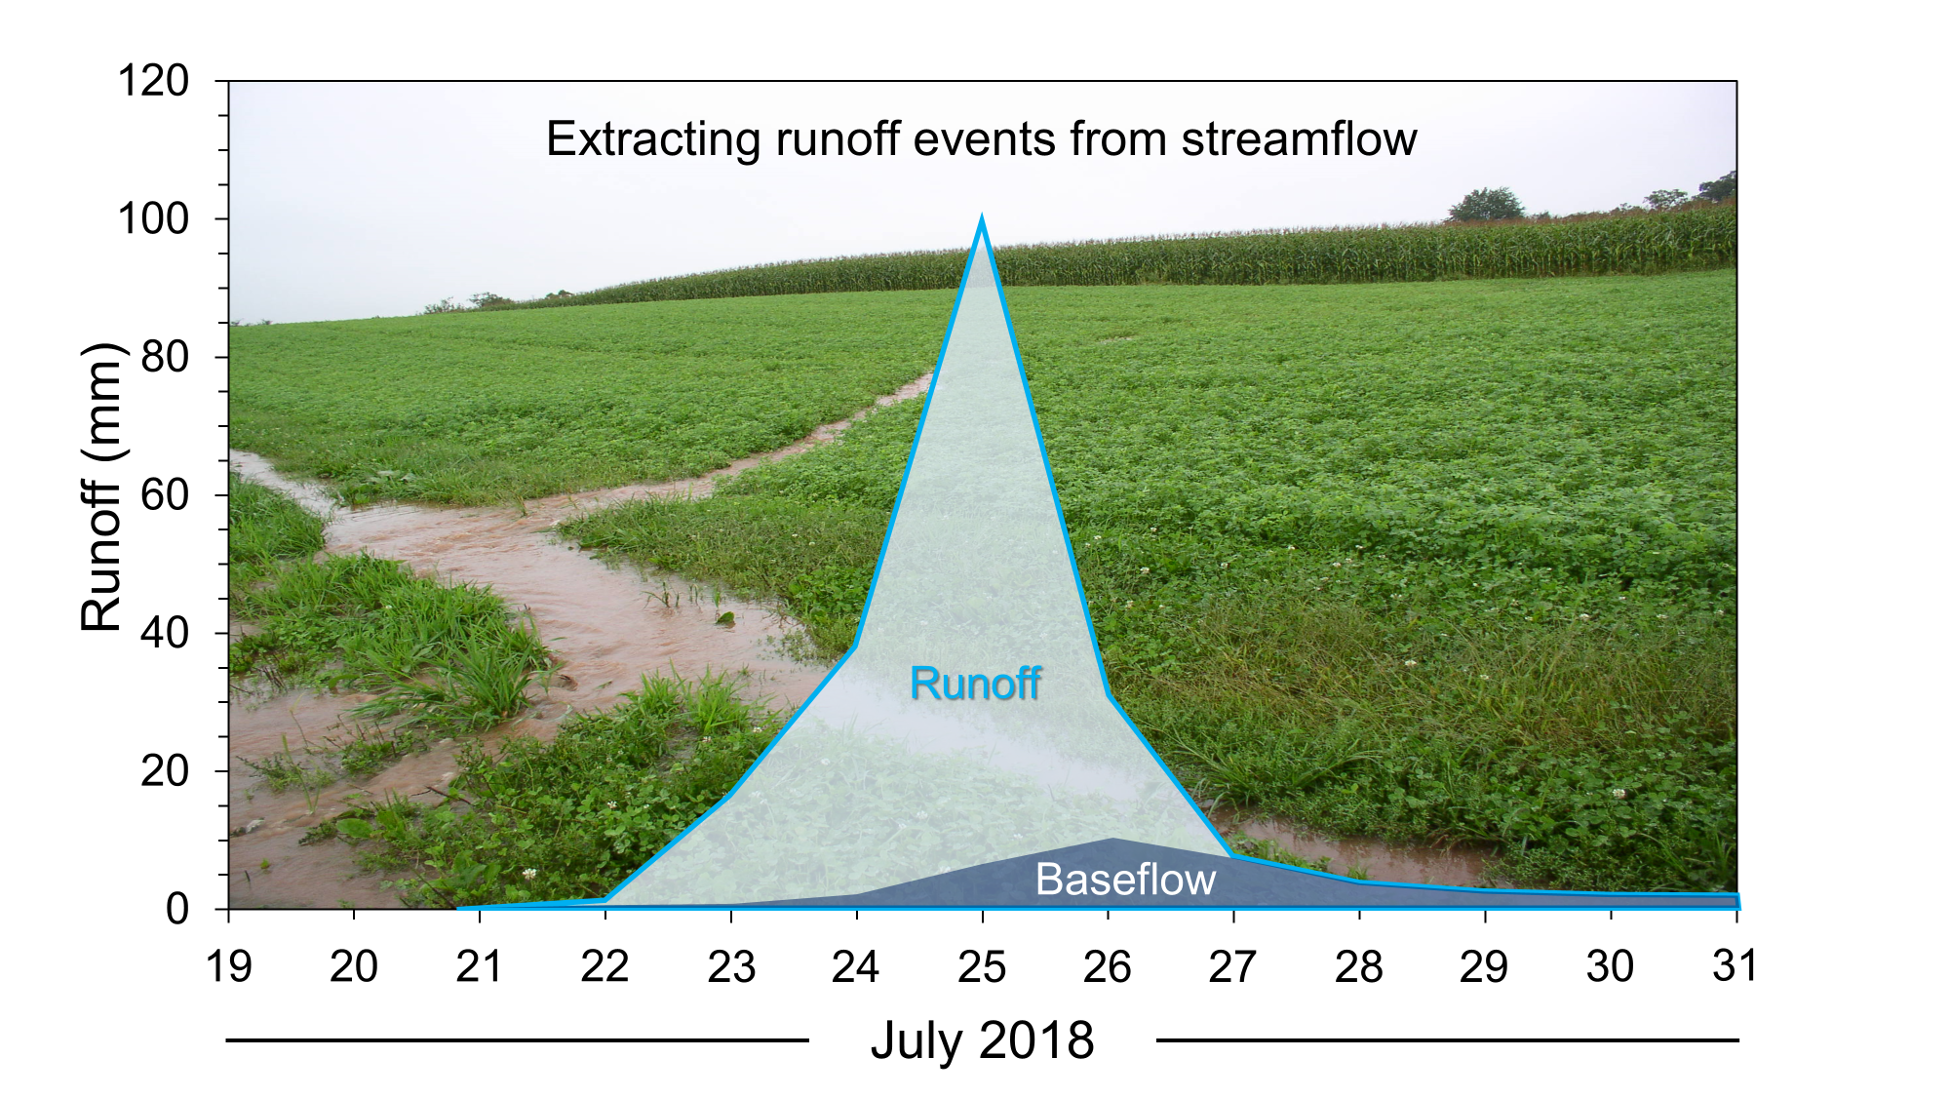 Figure 2: Diagram showing how streamflow was separated into slow components like baseflow and fast components like runoff. The example runoff event, which occurred in late July 2018, was triggered by repeated bouts of heavy thunderstorms over a several day period. For this event and others in the dataset, a simple digital filtering algorithm was used to automatically estimate daily runoff amounts from continuous streamflow observations.